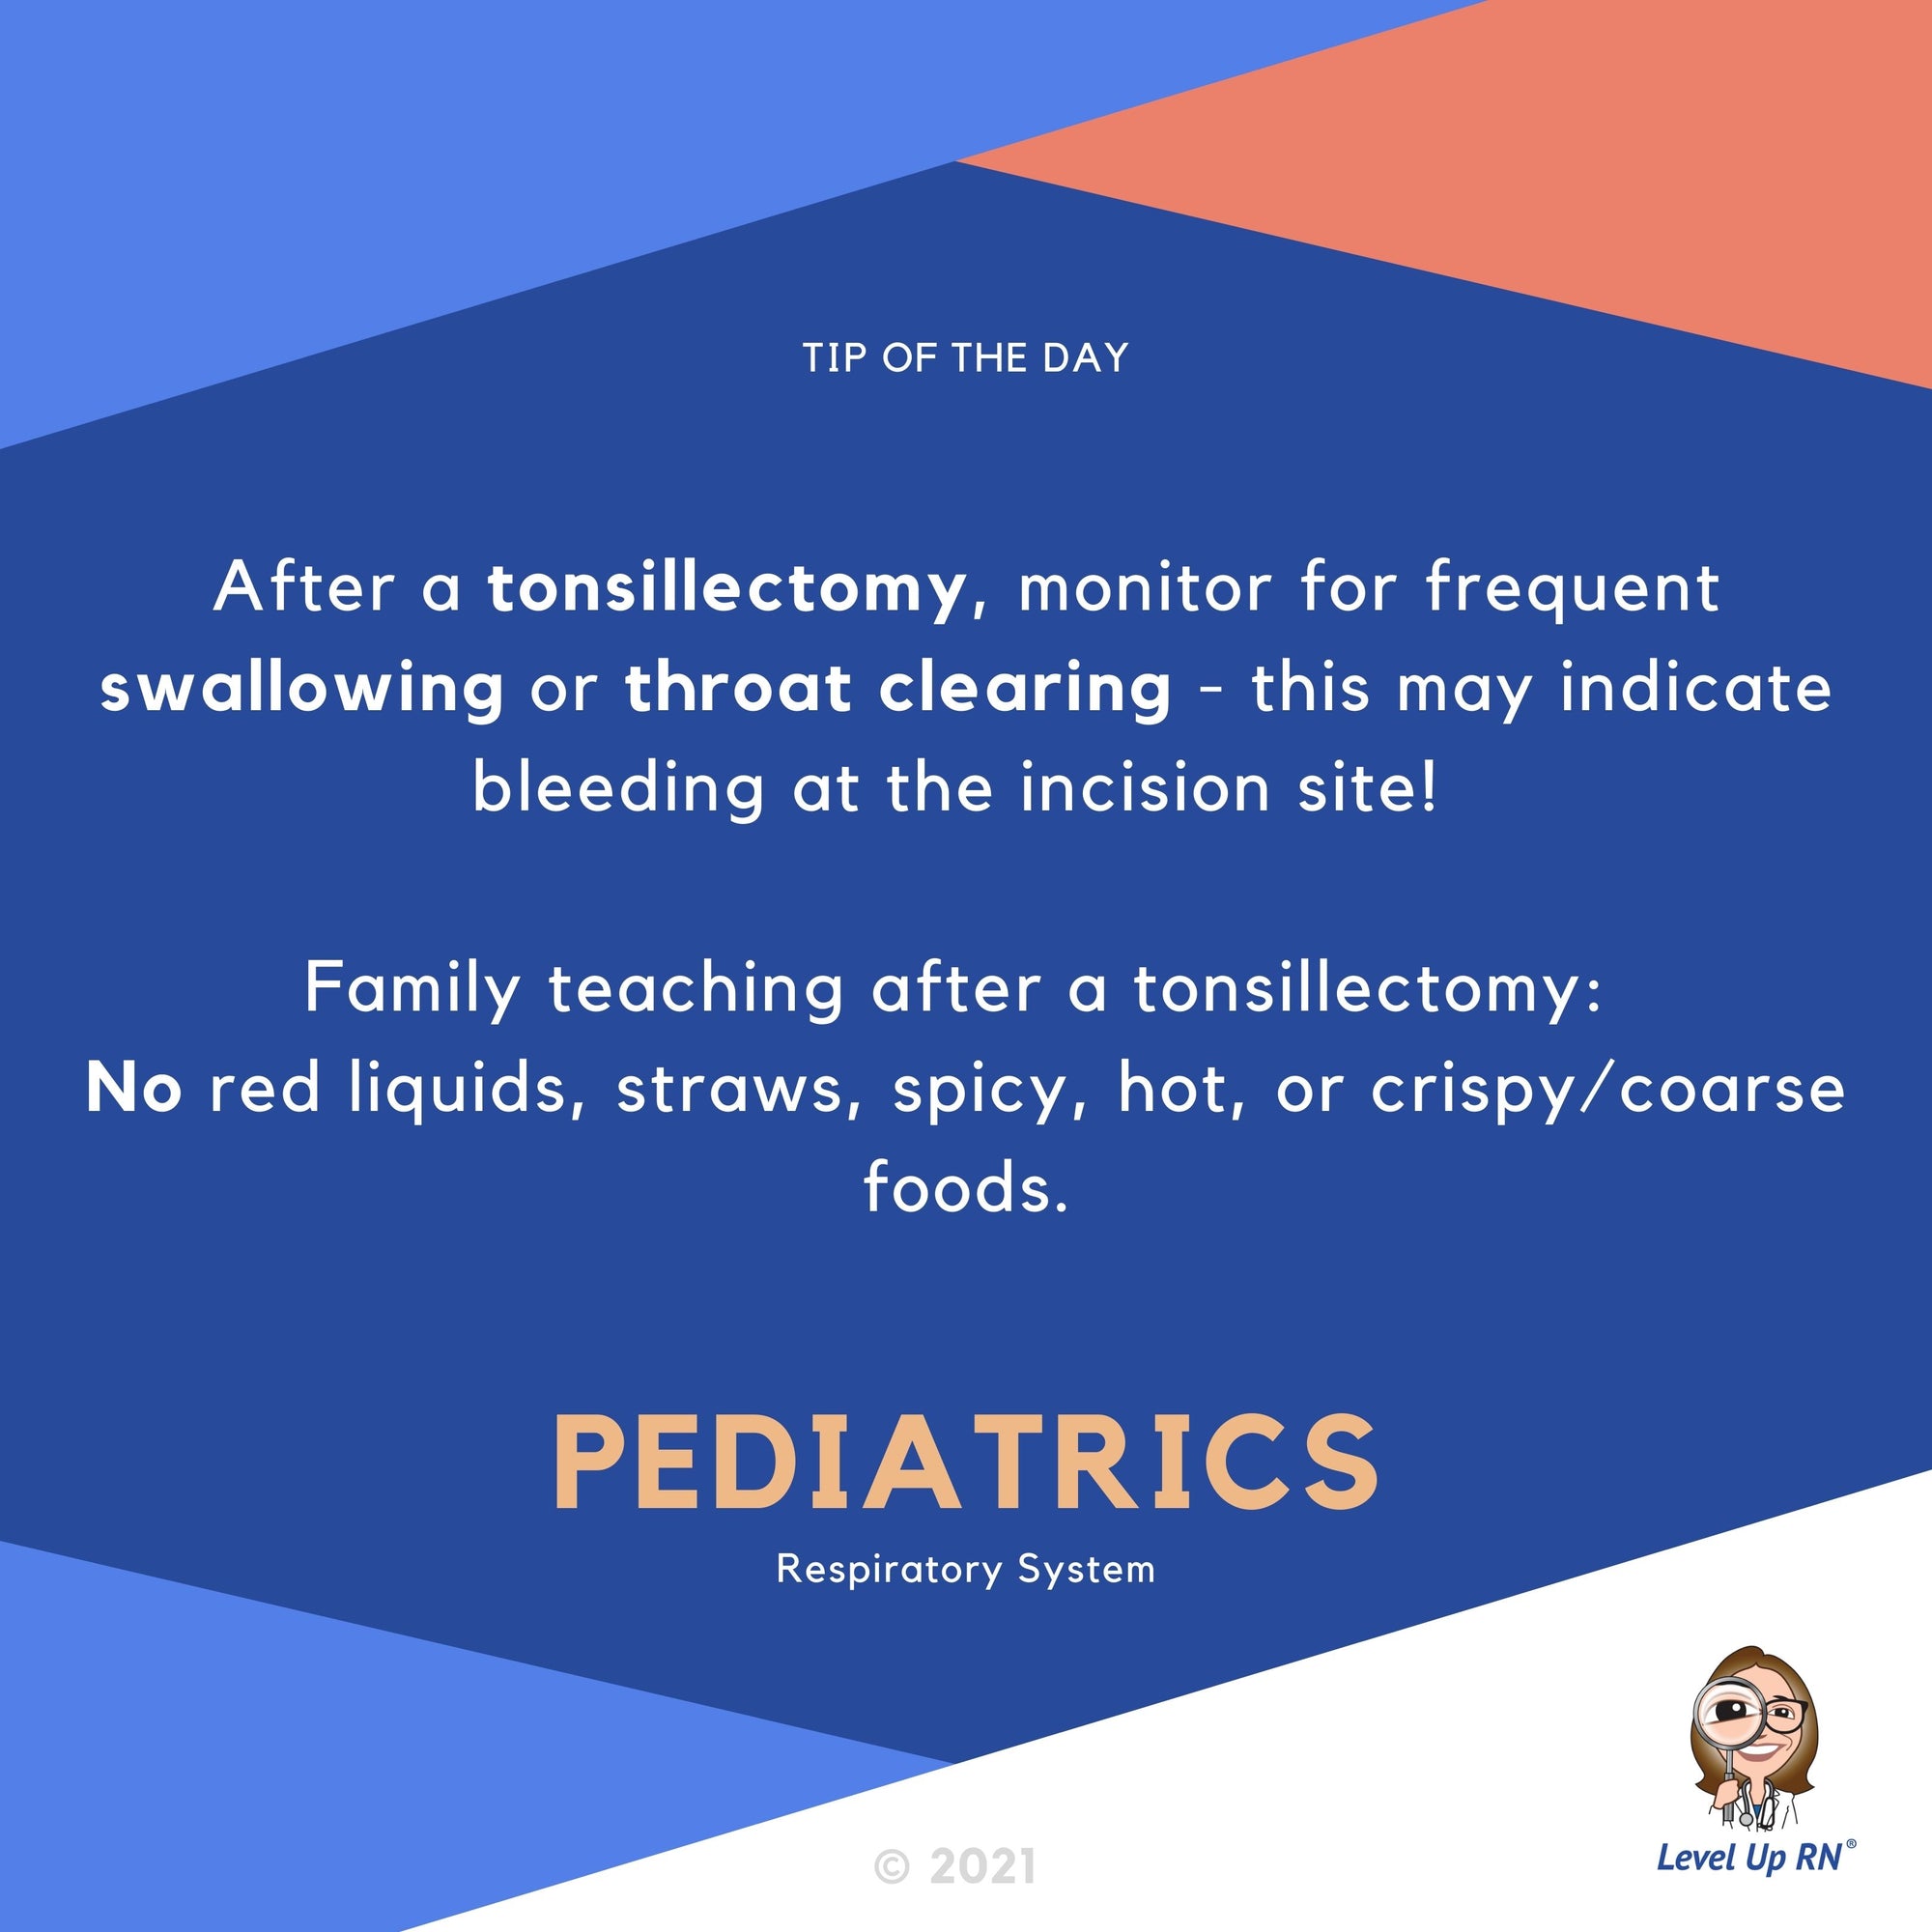 After a tonsillectomy, monitor for frequent swallowing or throat clearing - this may indicate bleeding at the incision site!  Family teaching after a tonsillectomy: no red liquids, straws, spicy, hot, or crispy/coarse foods.